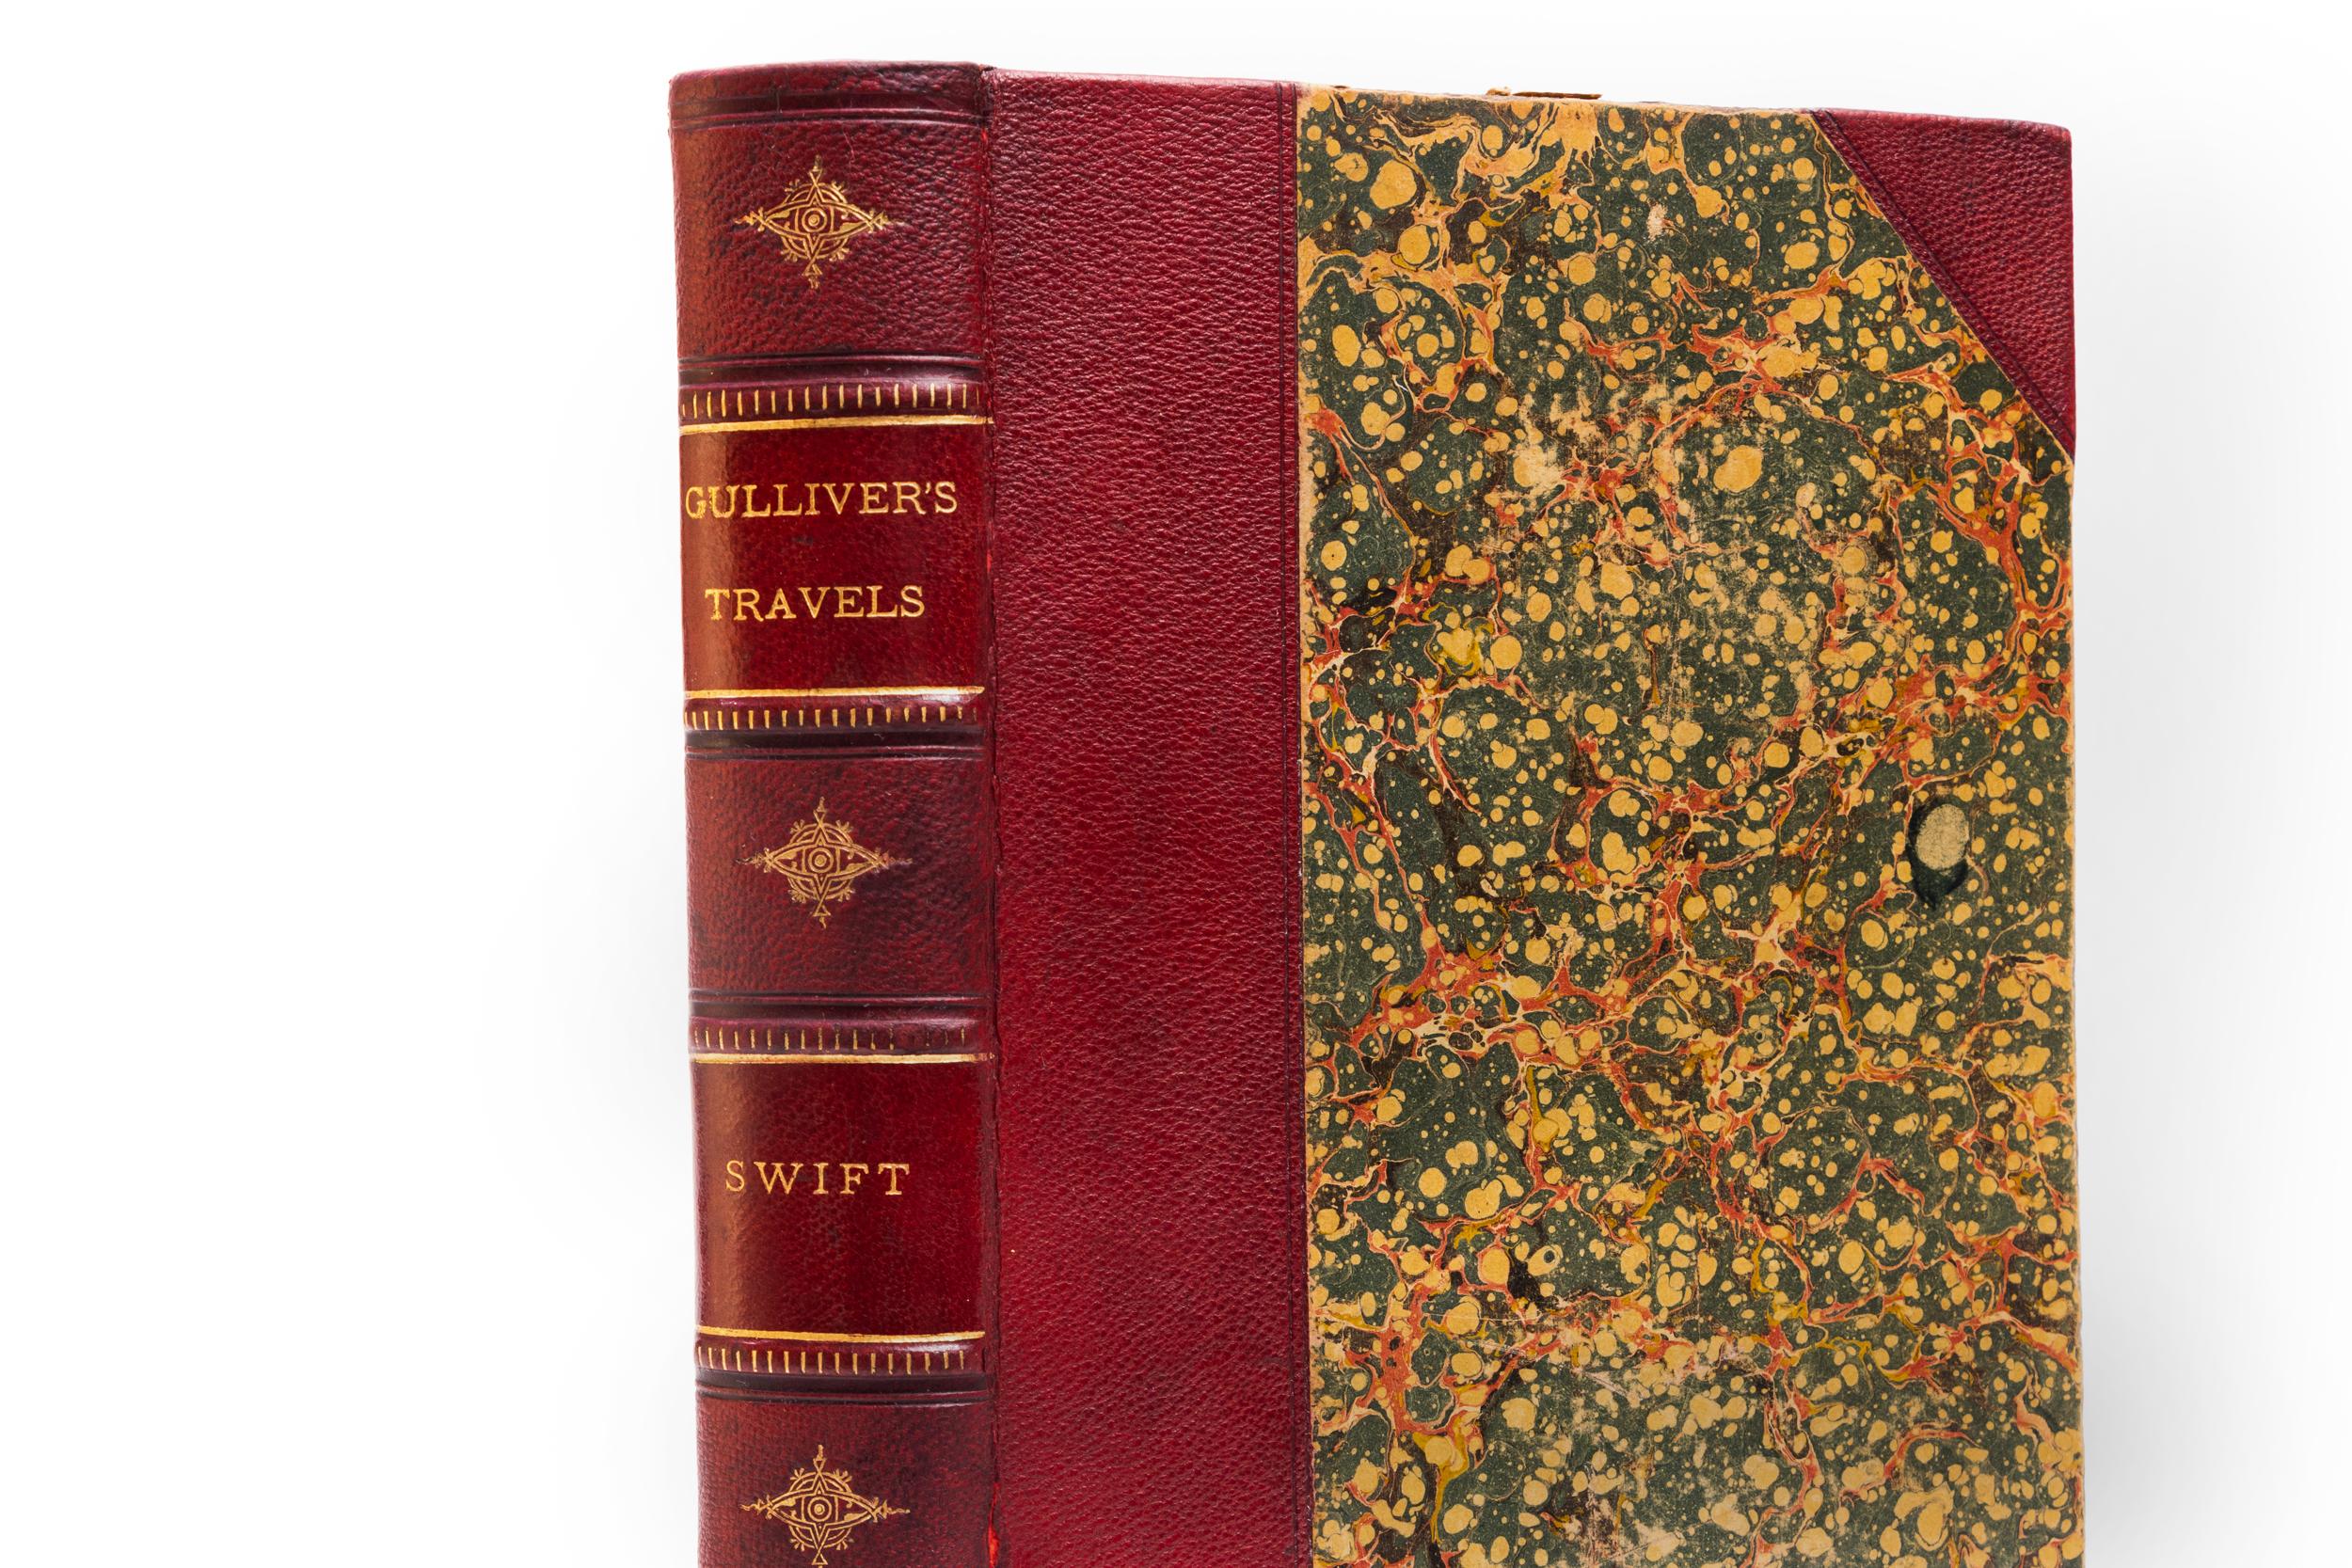 1 Volume. Jonathan Swift, D.D. Gulliver's Travels. Bound in 3/4 red morocco. Marbled boards. Raised bands. Decorative gilt emblems on spines. All edges marbled. Marbled endpapers. Illustrated. Embellished with numerous wood-engravings. Published: